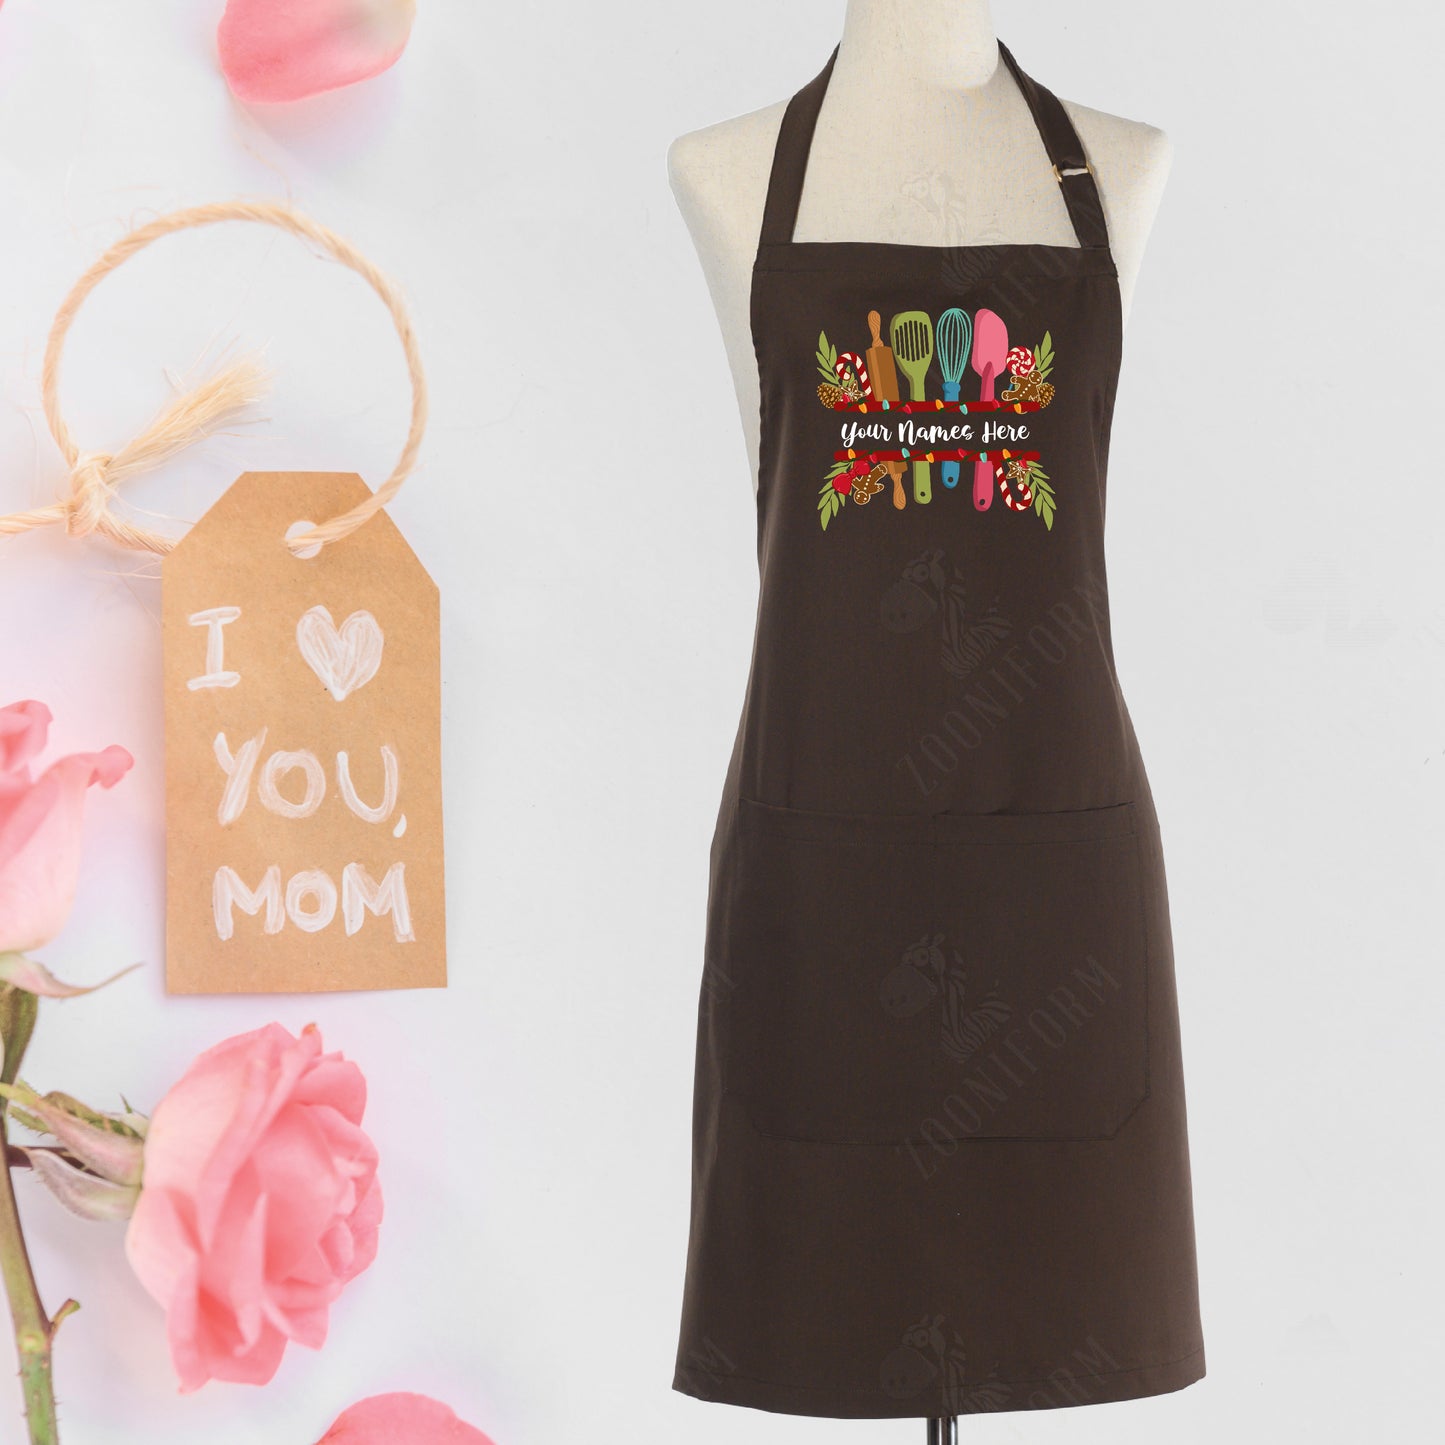 Personalize Name for Kitchen Apron with Two Pockets, Adjustable Strap